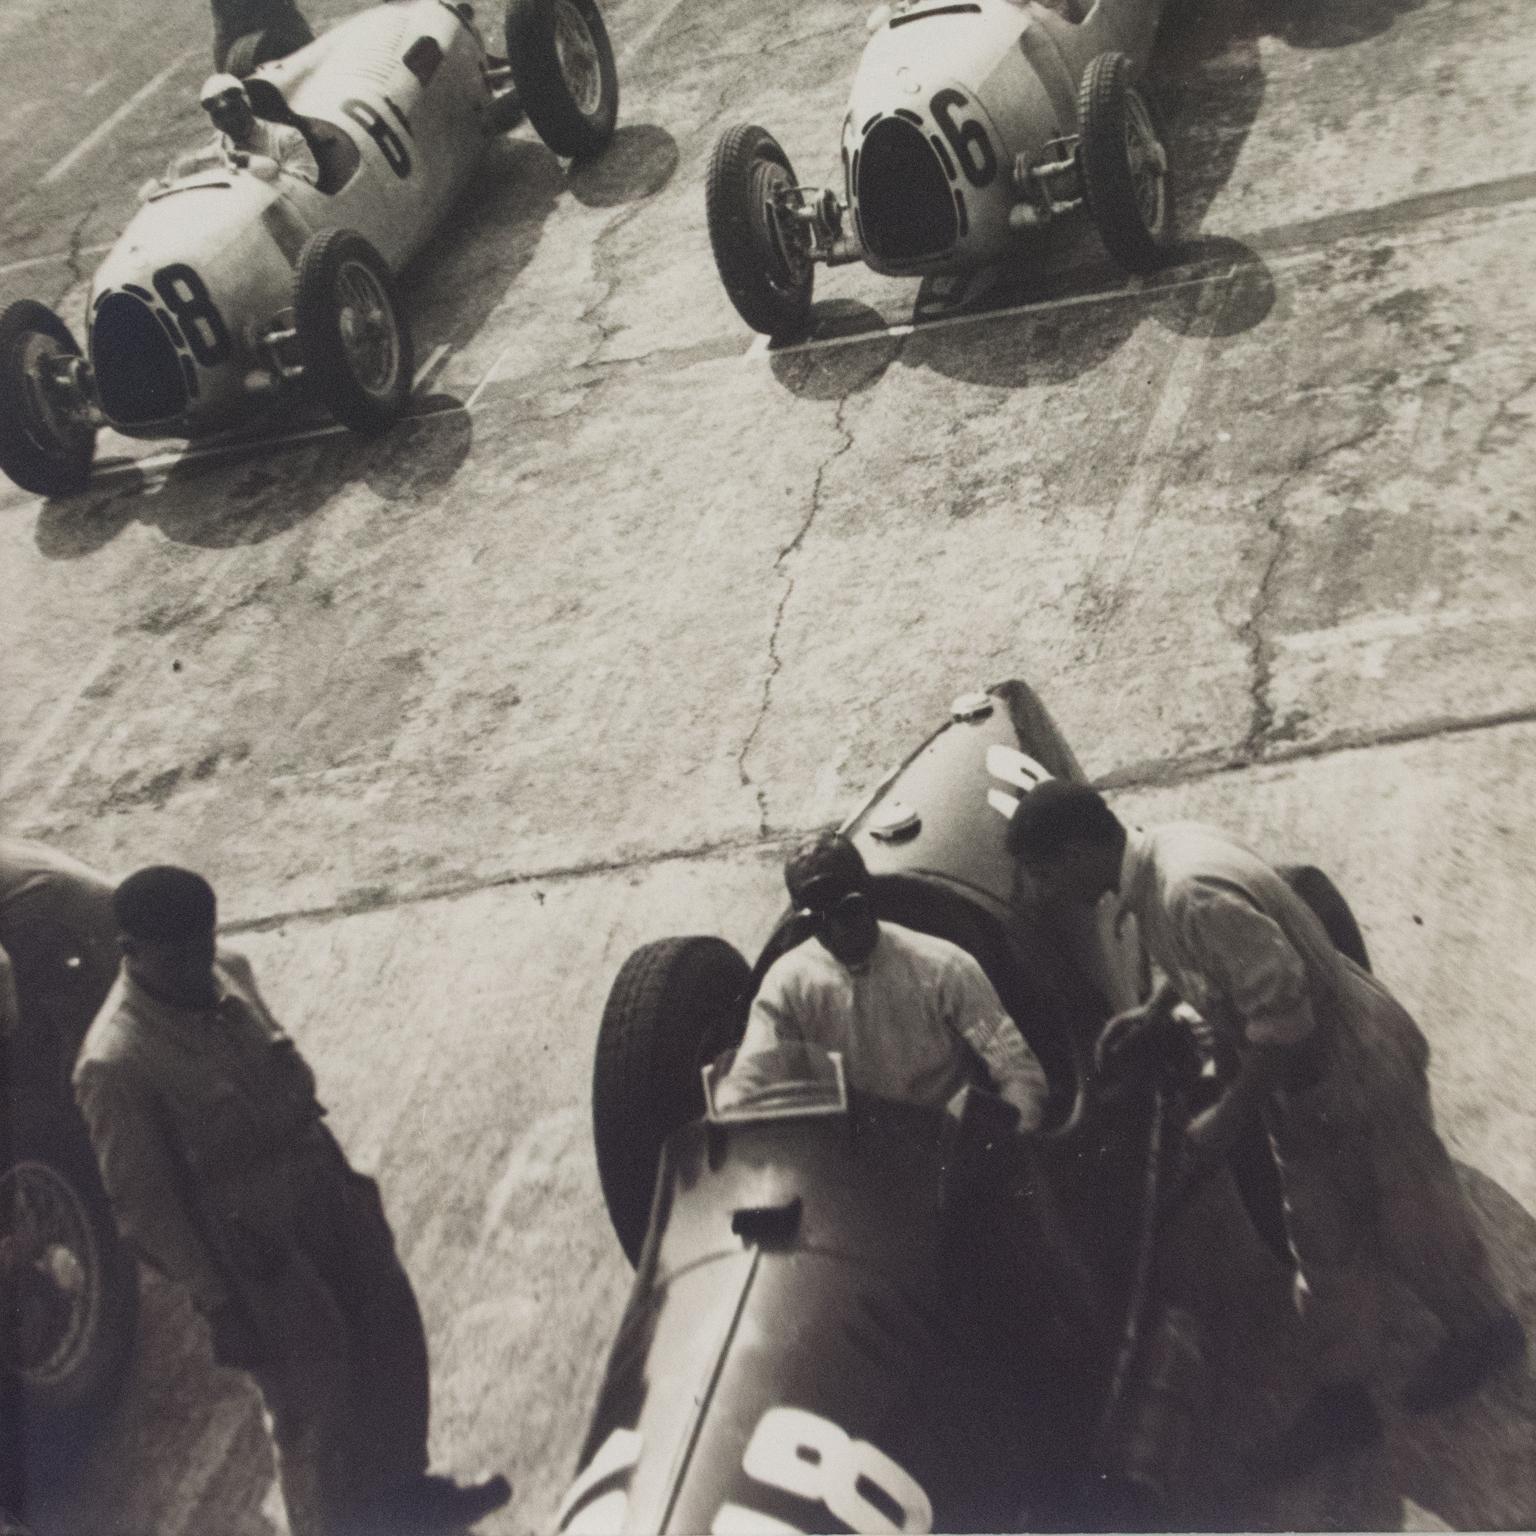 An original silver gelatin black and white photograph by Lauro Bordin, Milano - Departure of the car race in Monza, Italy, 1936.
Features:
Original Silver Gelatin Print Photograph framed
Press Photograph
Press Agency: Anonymous
Photographer: Lauro